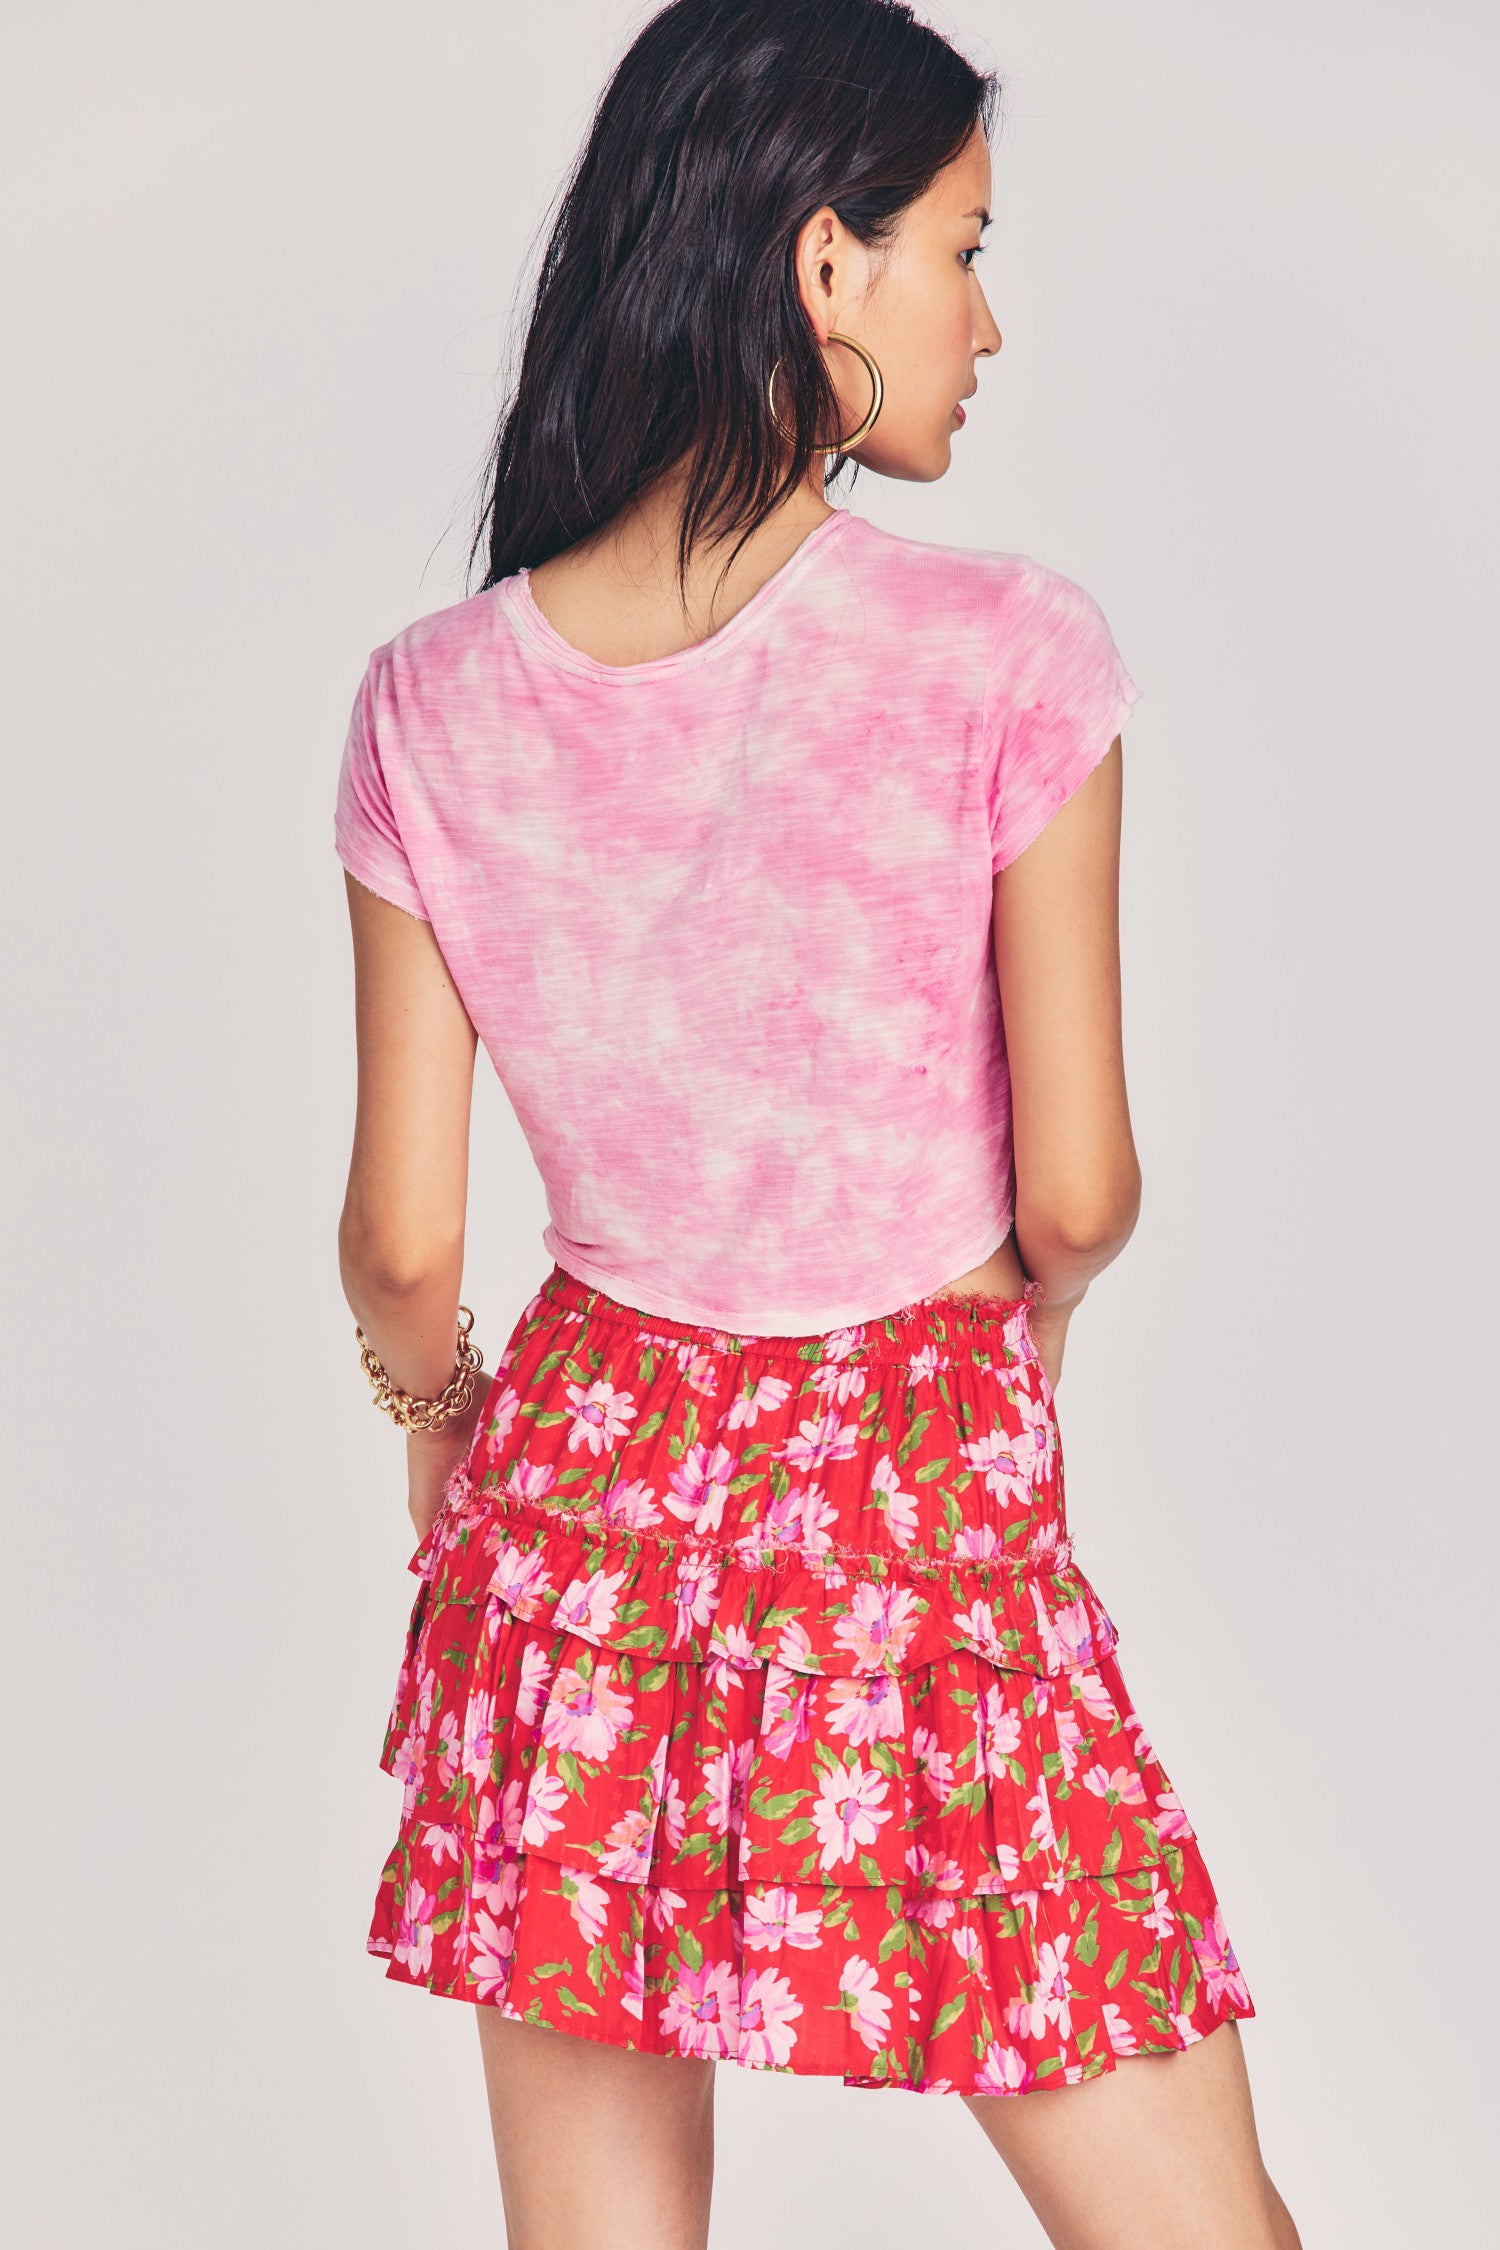 Womens red mini skirt with light pink floral print design and ruffled tiers